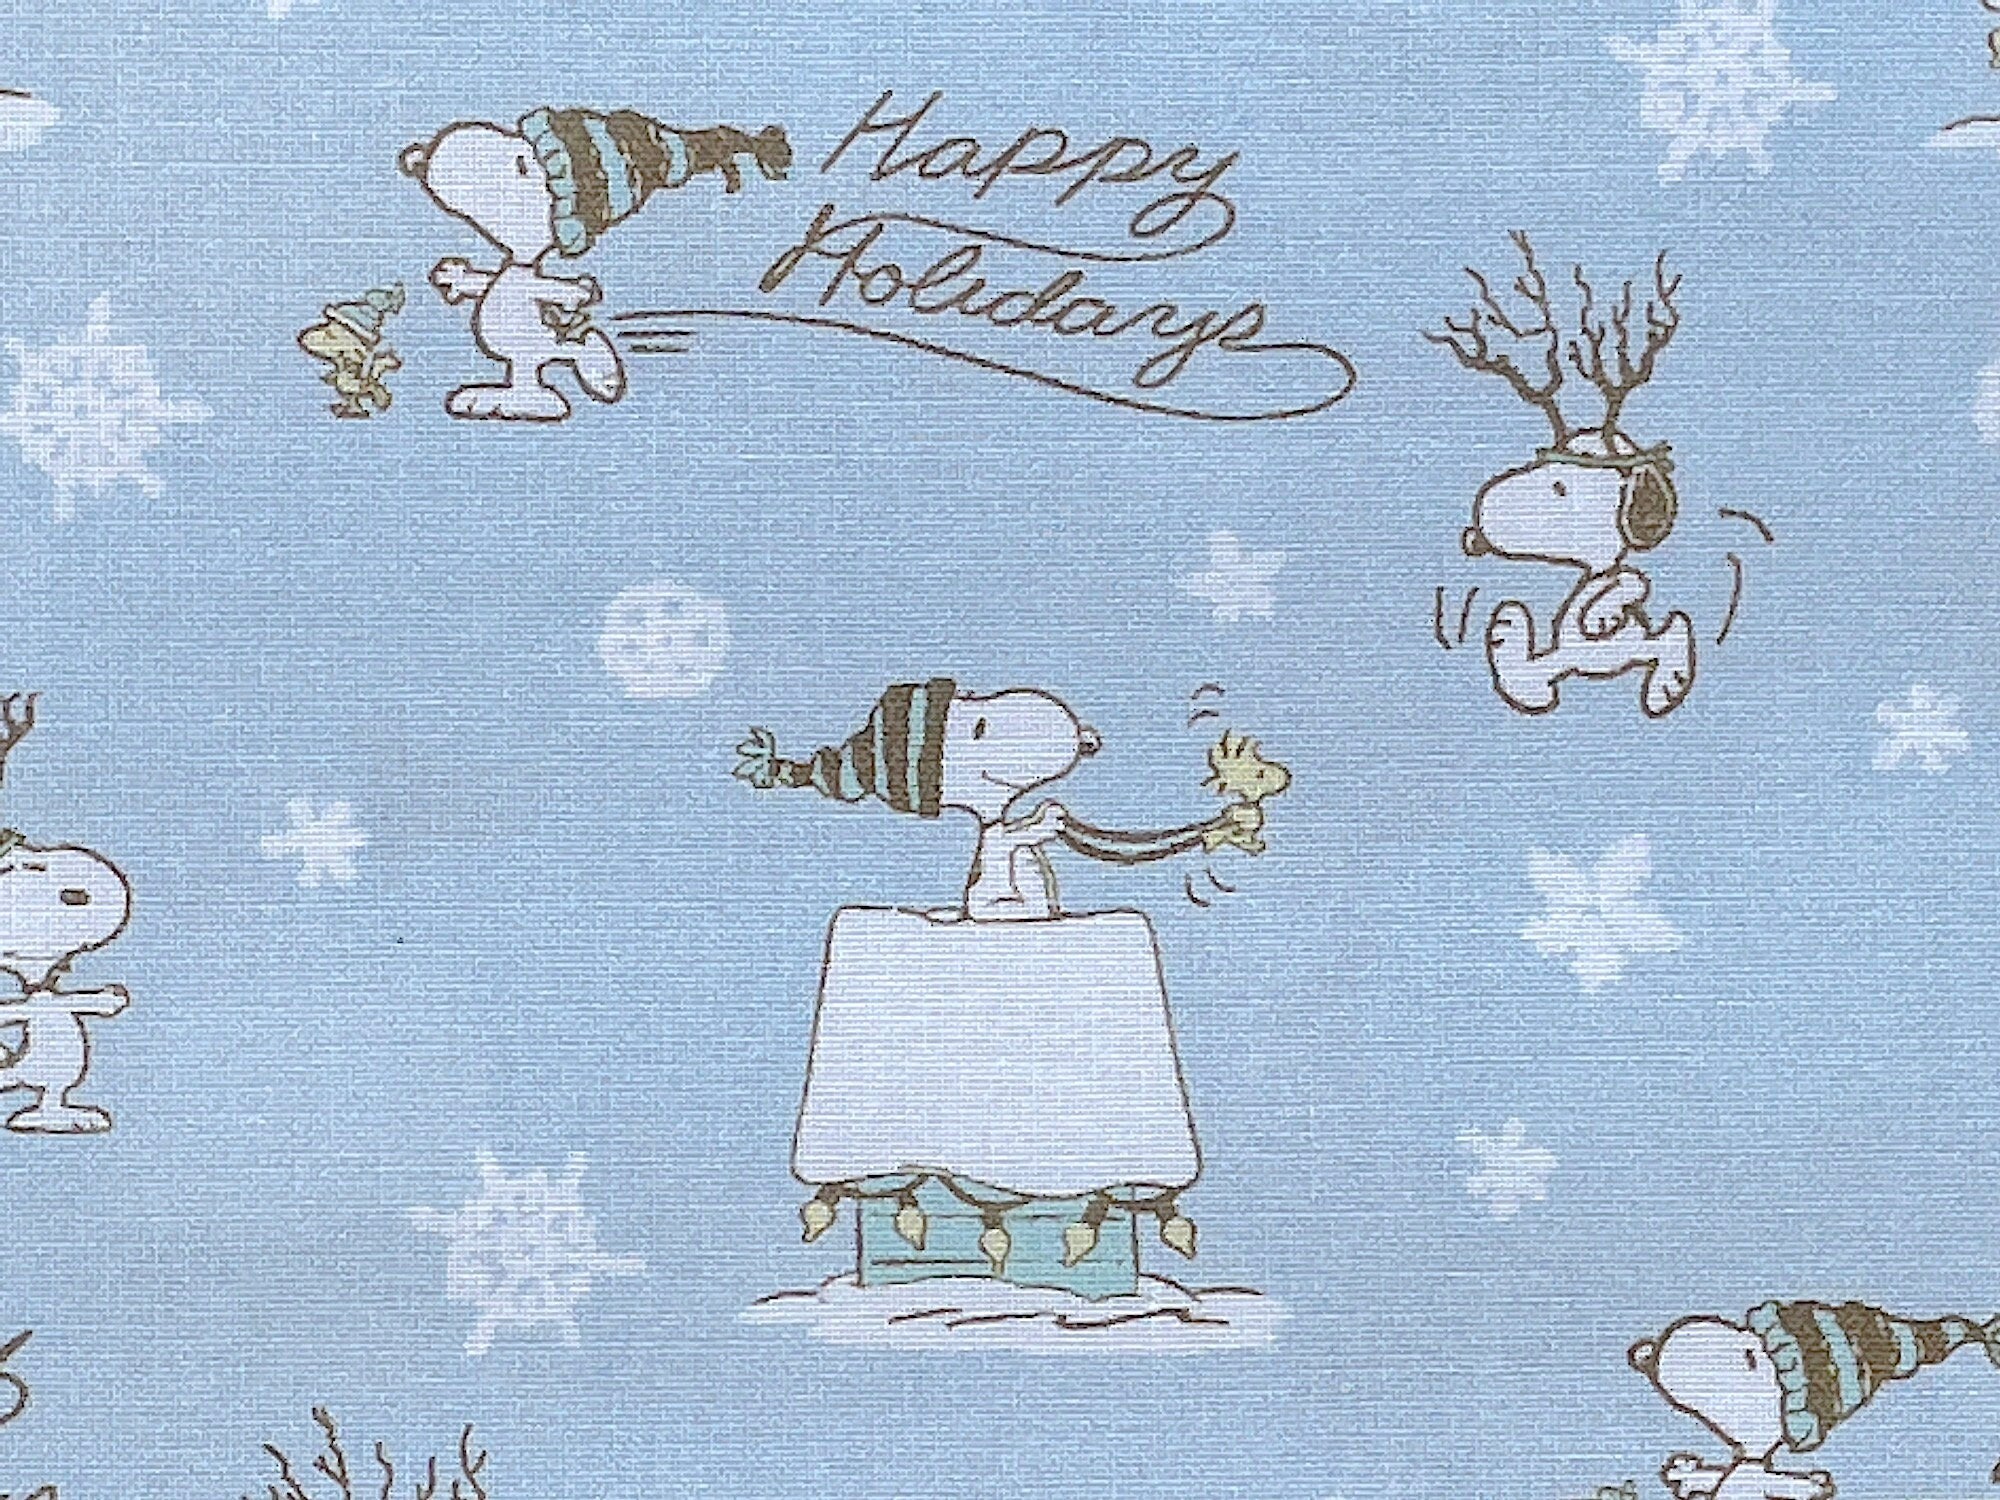 Close up of snoopy on top of his house, wearing antlers and skating.